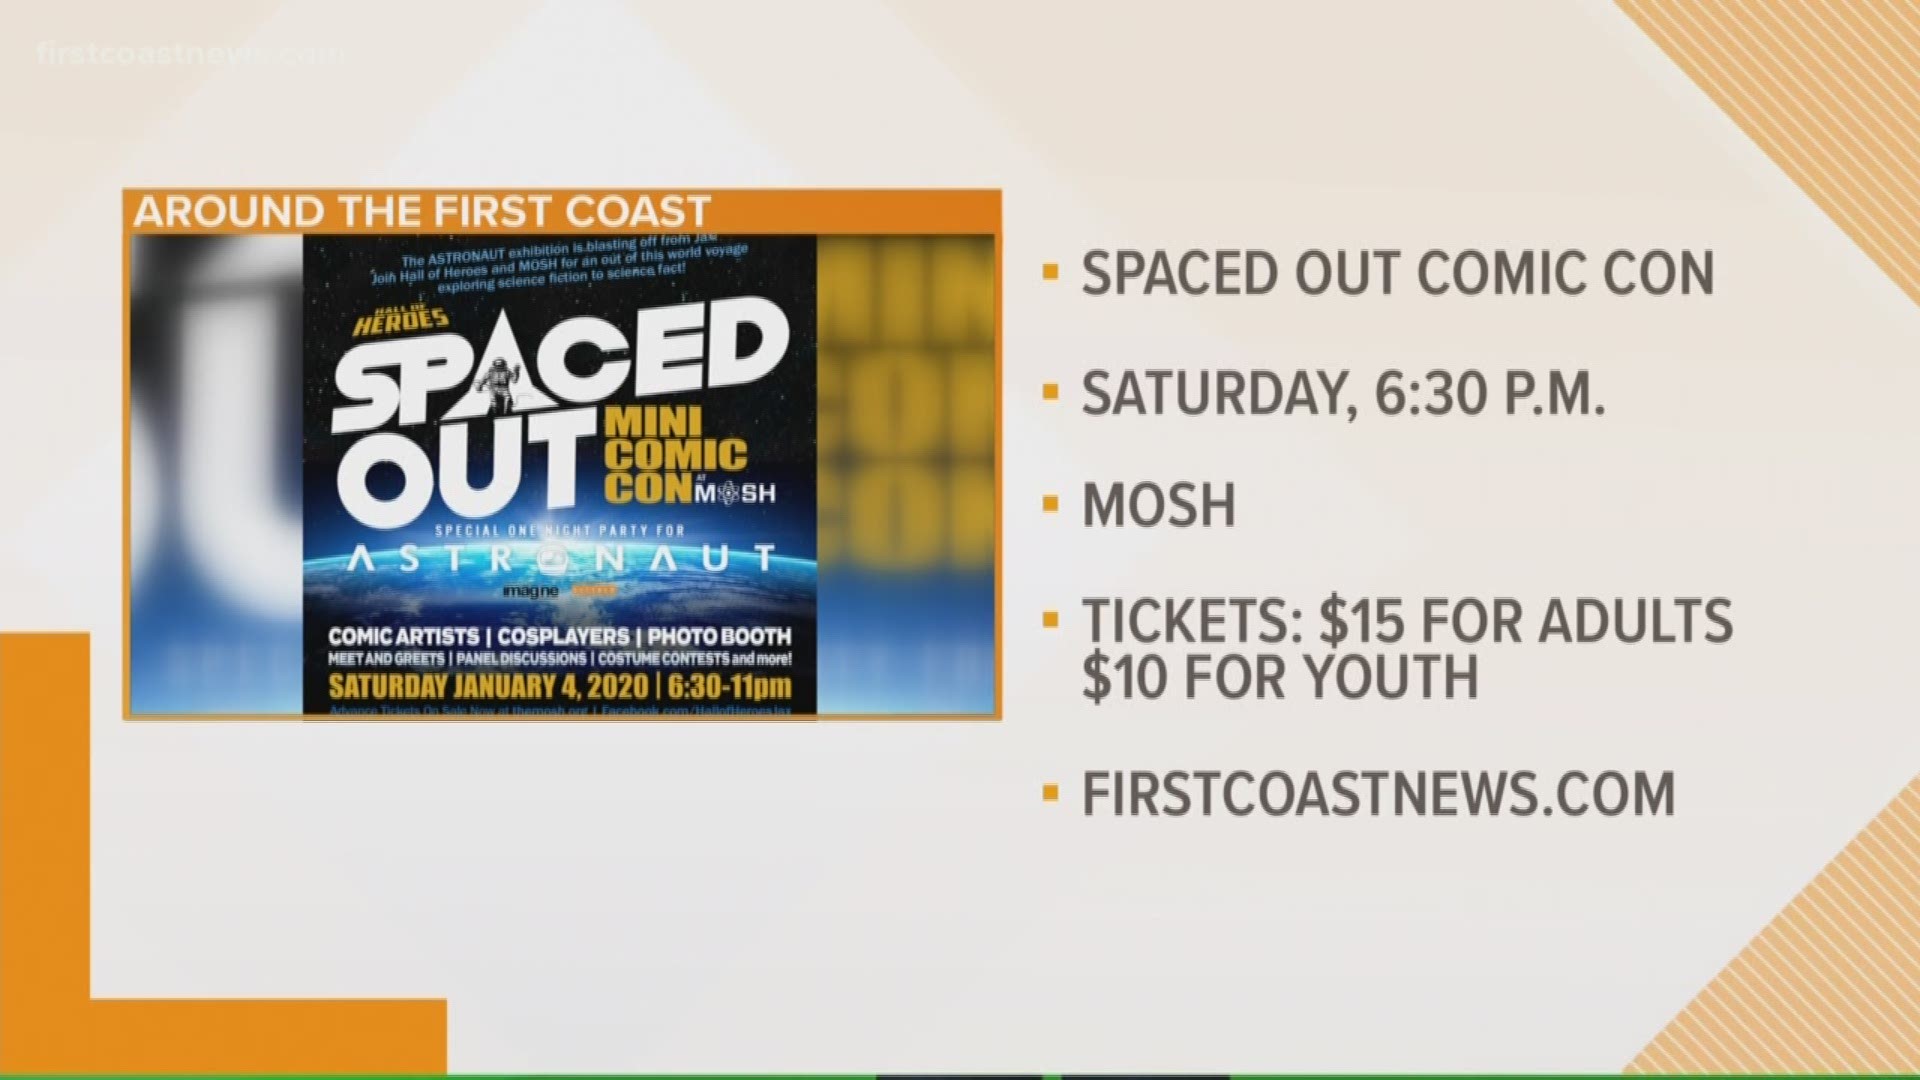 Spaced Out Comic Con is happening at MOSH Saturday night at 6:30 p.m!